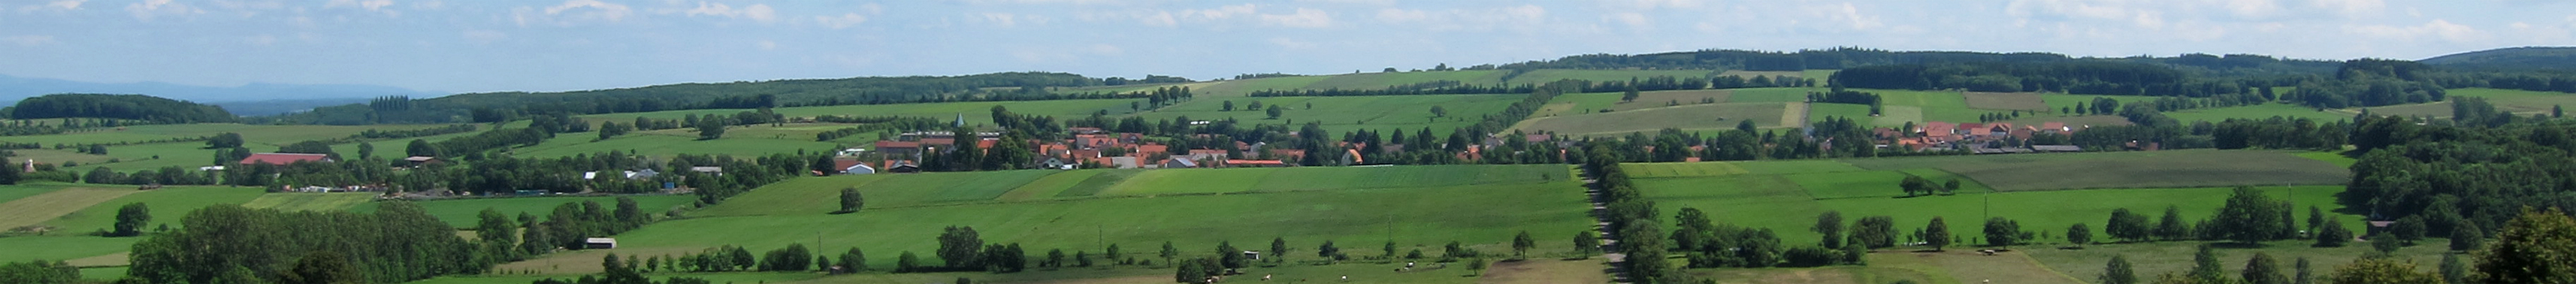 View of Engelrod, June 2012. Source: Wikipedia.com.